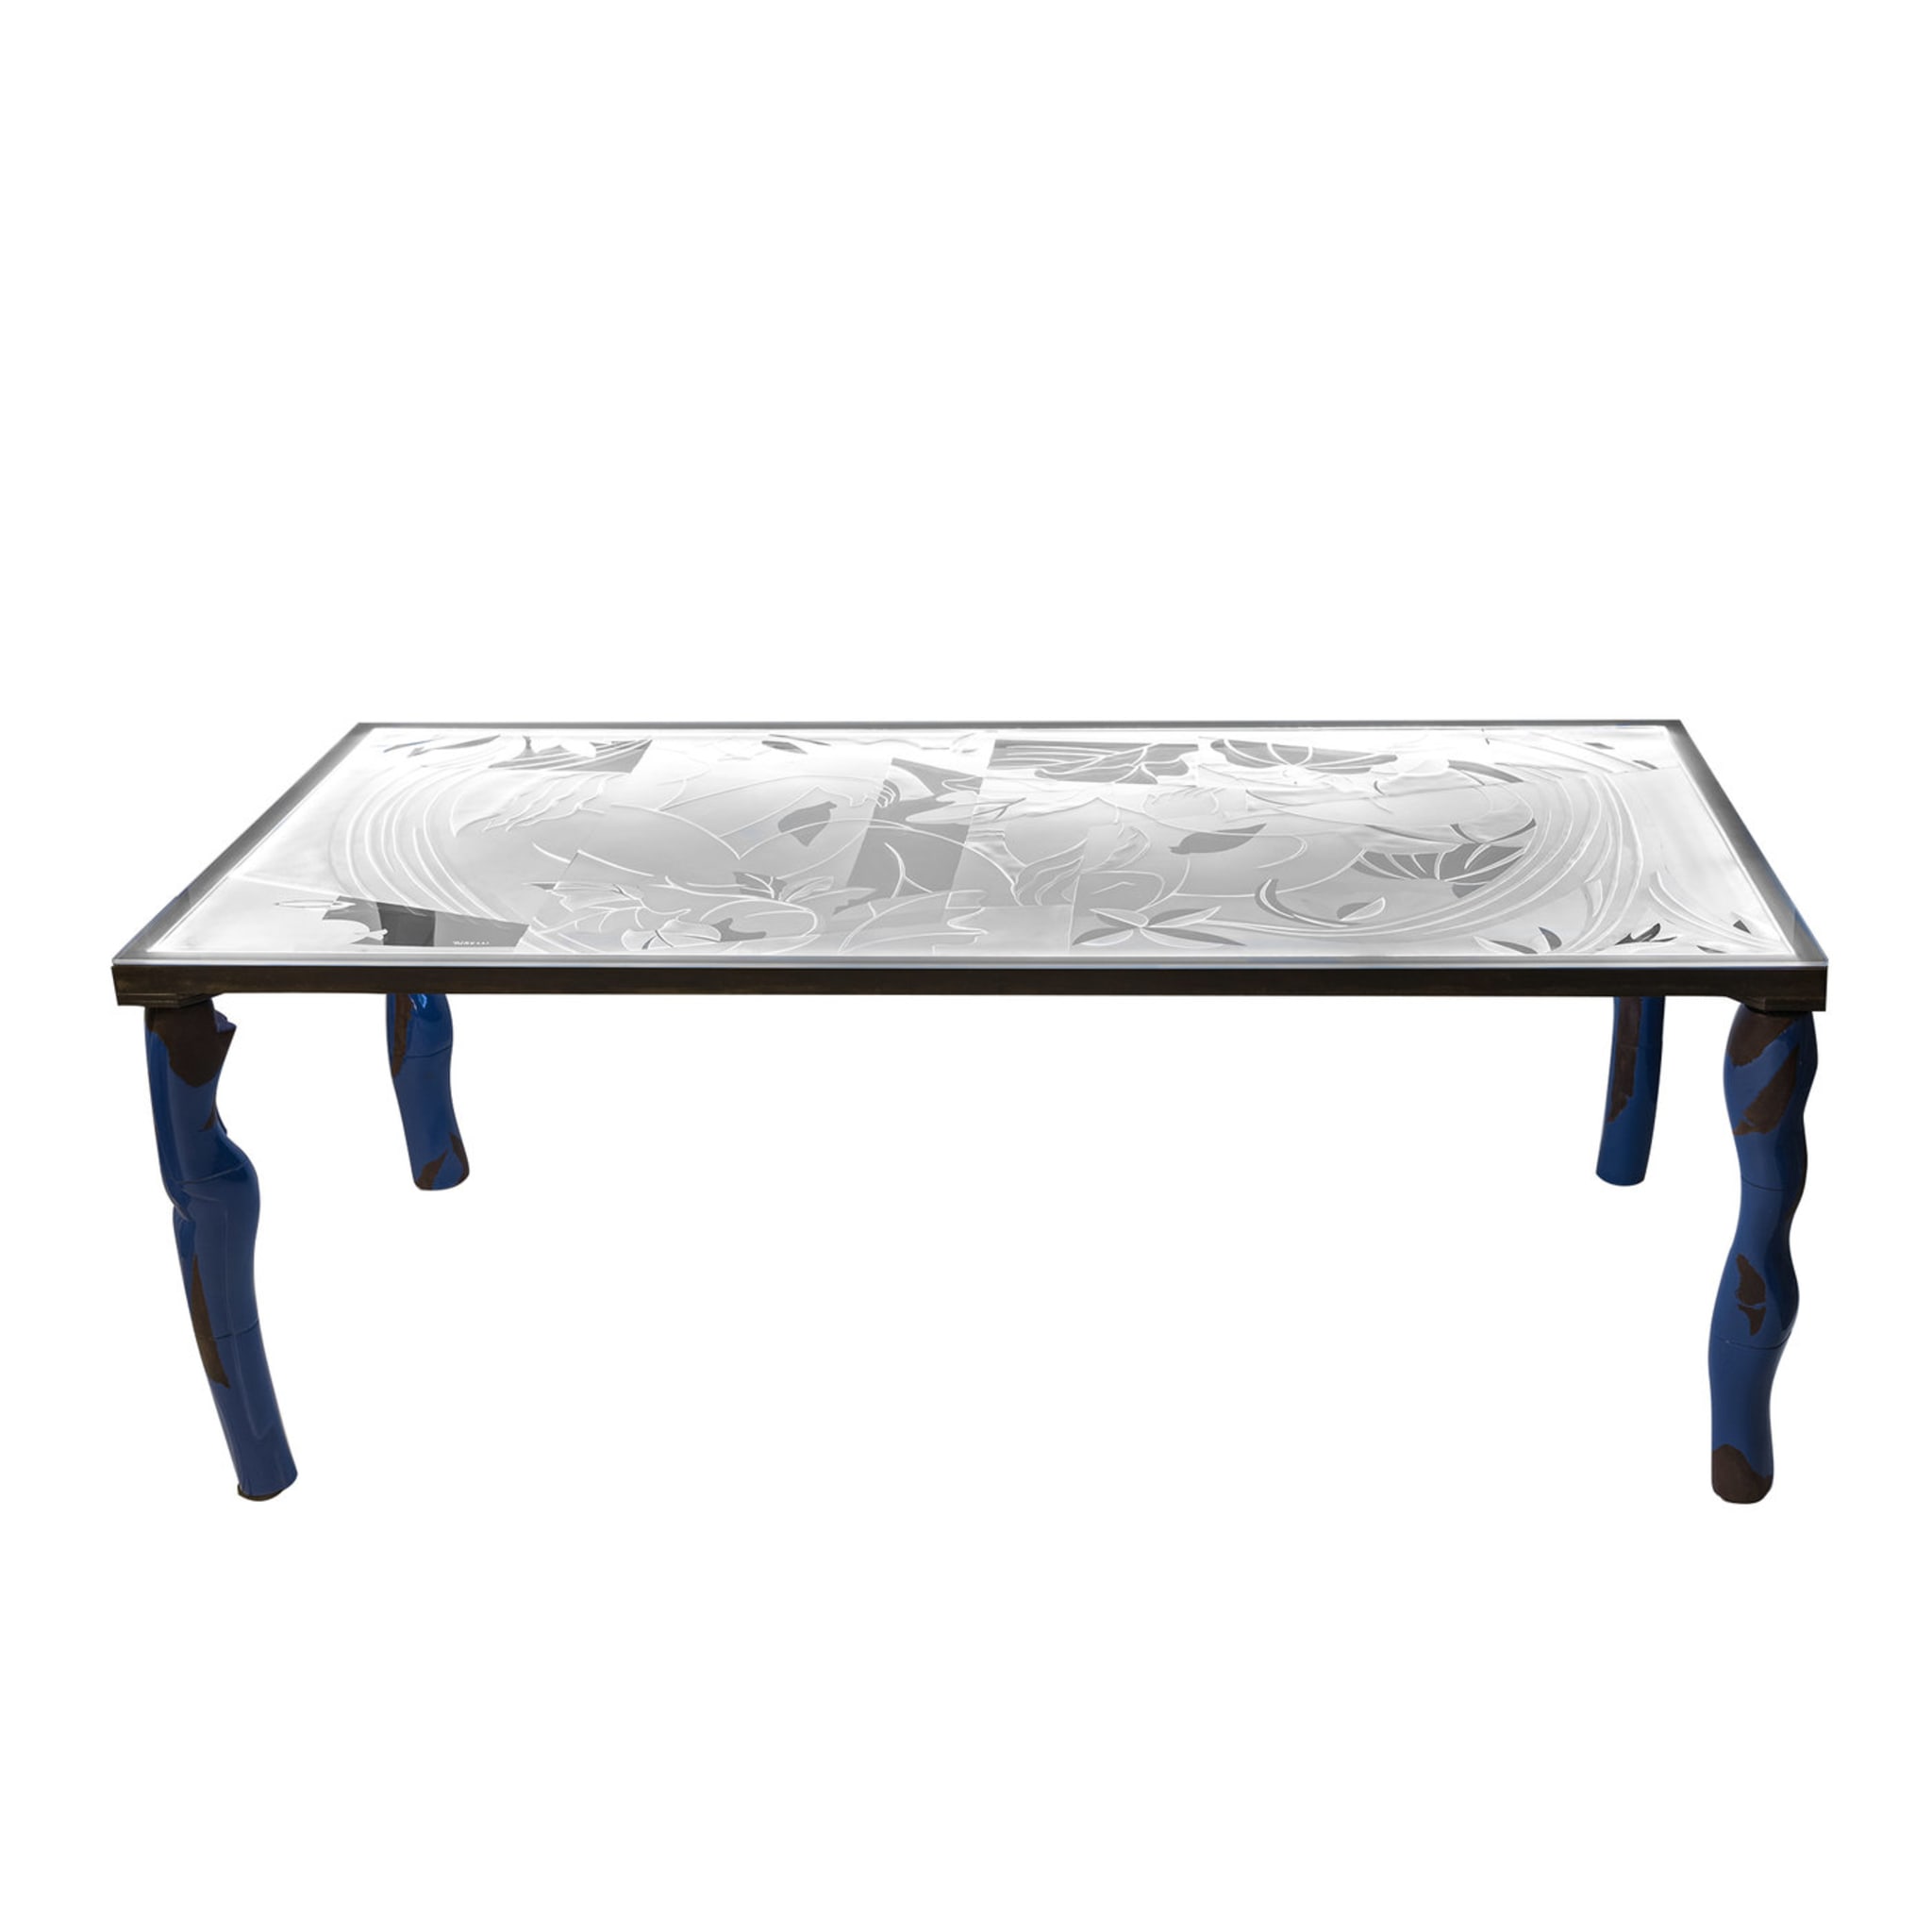 Ivana Dining Table - Alternative view 1